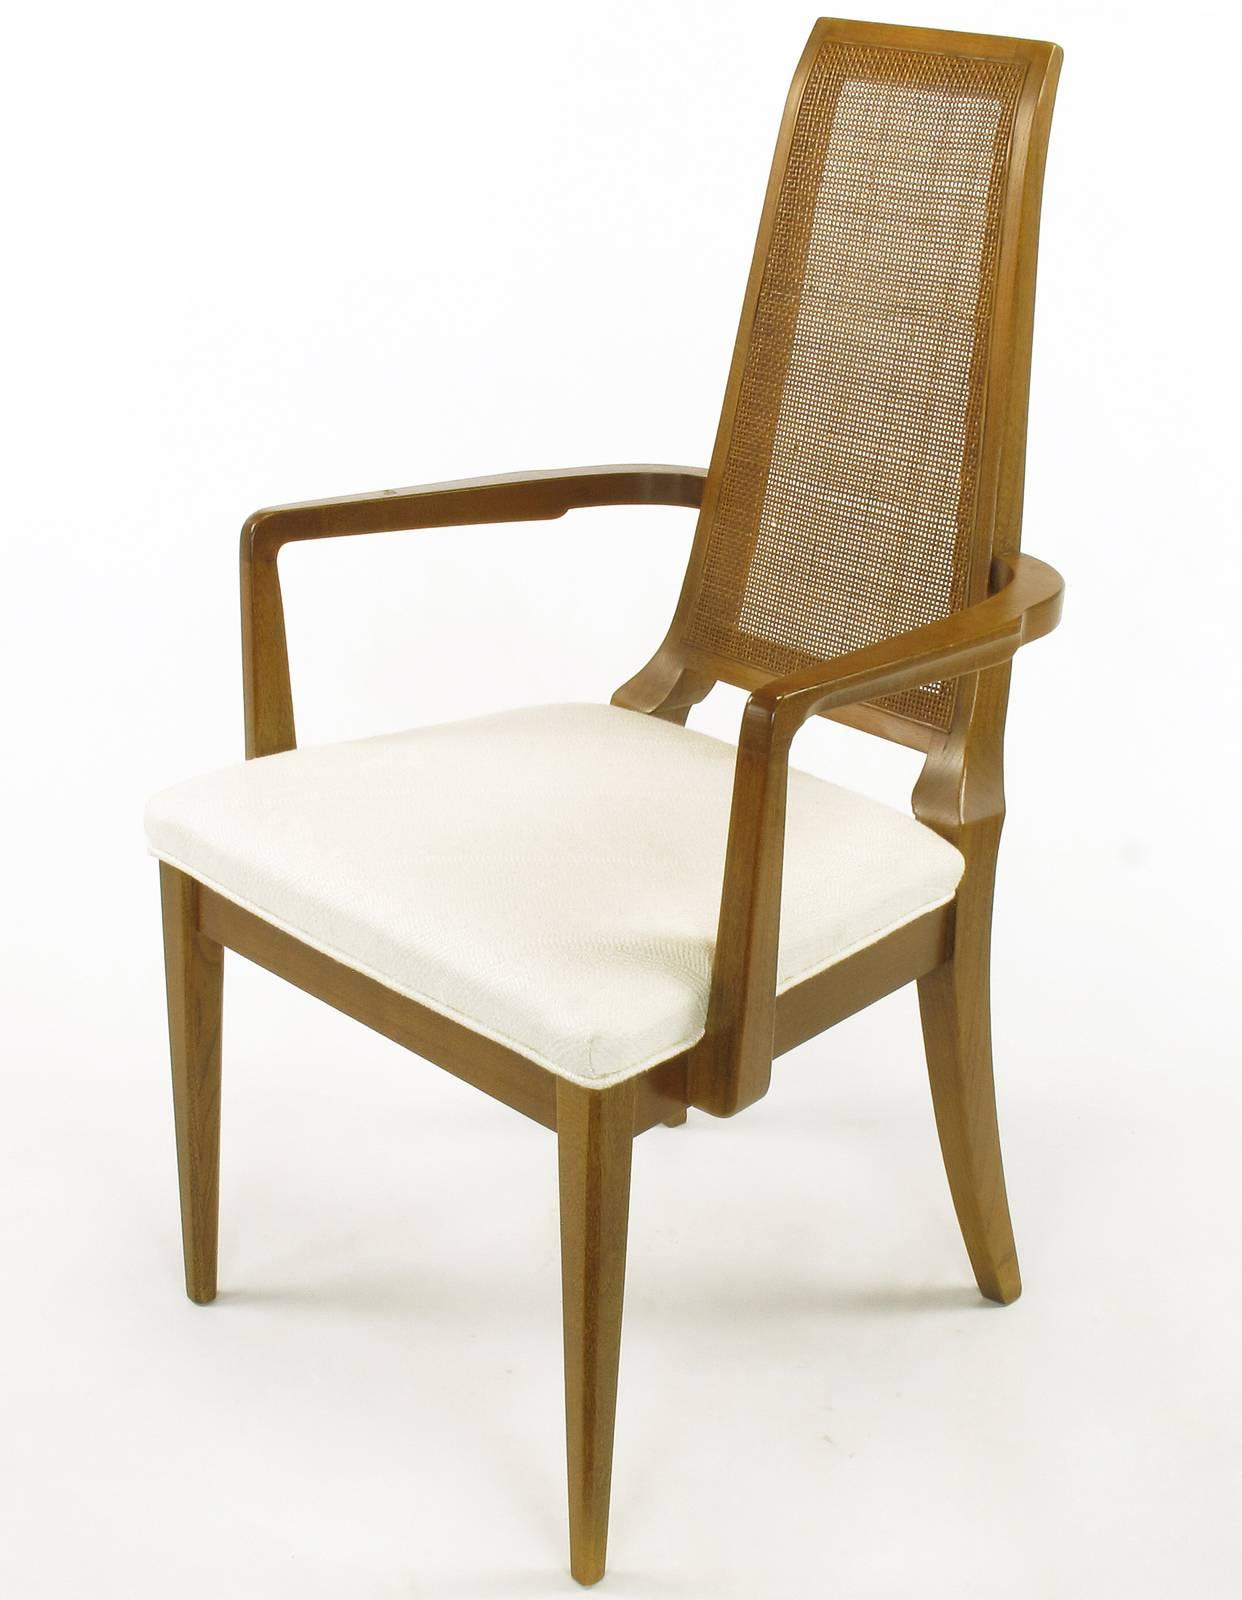 Sleek, circa 1950s Modern Walnut and Cane Dining Chairs In Good Condition For Sale In Chicago, IL